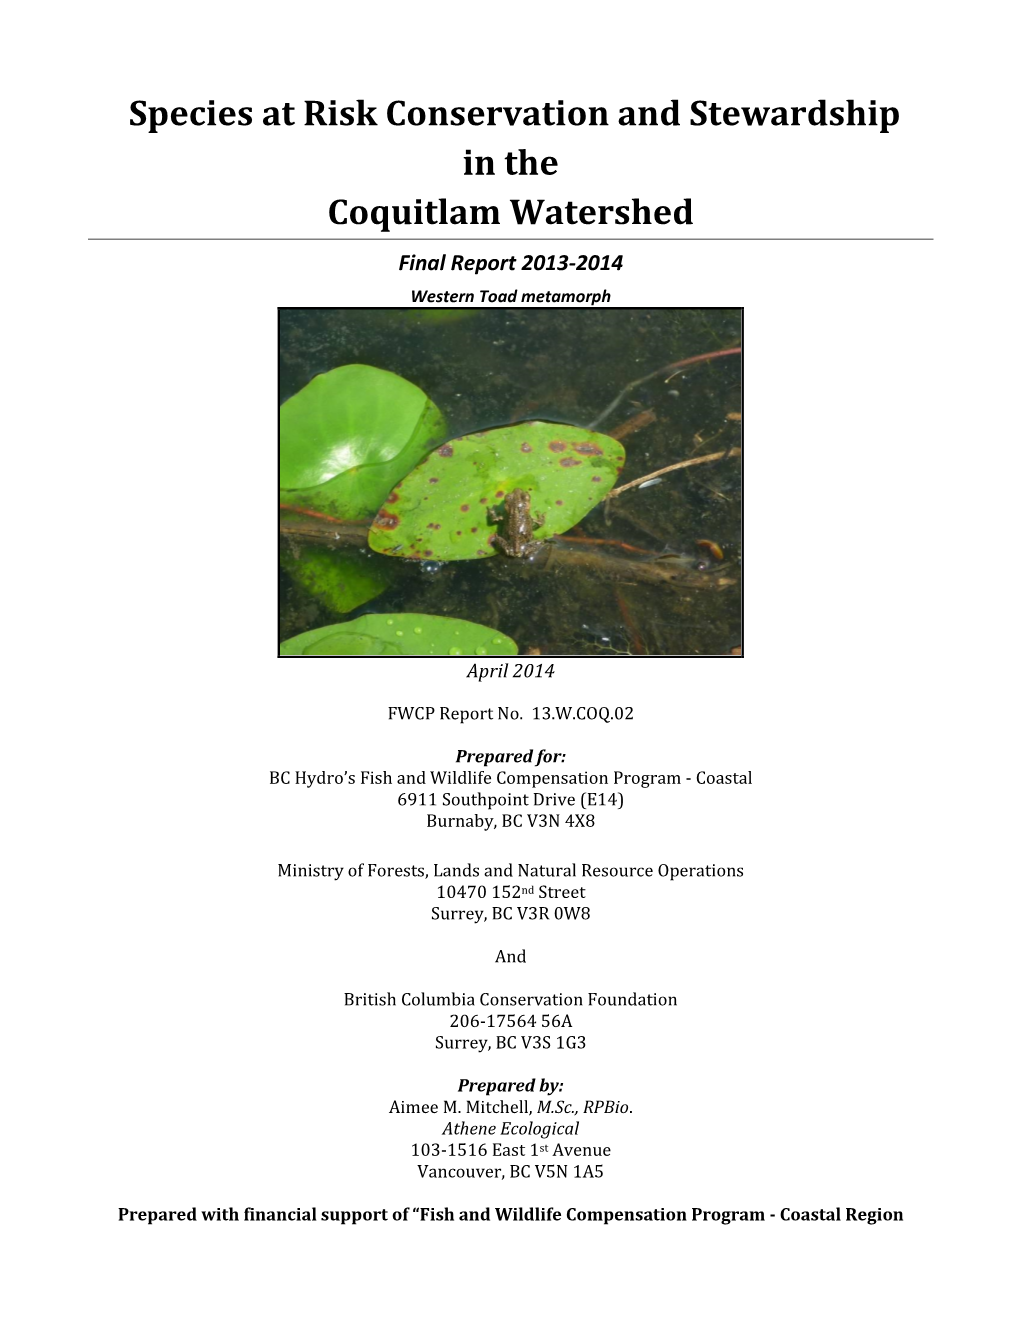 Species at Risk Conservation and Stewardship in the Coquitlam Watershed Final Report 2013-2014 Western Toad Metamorph